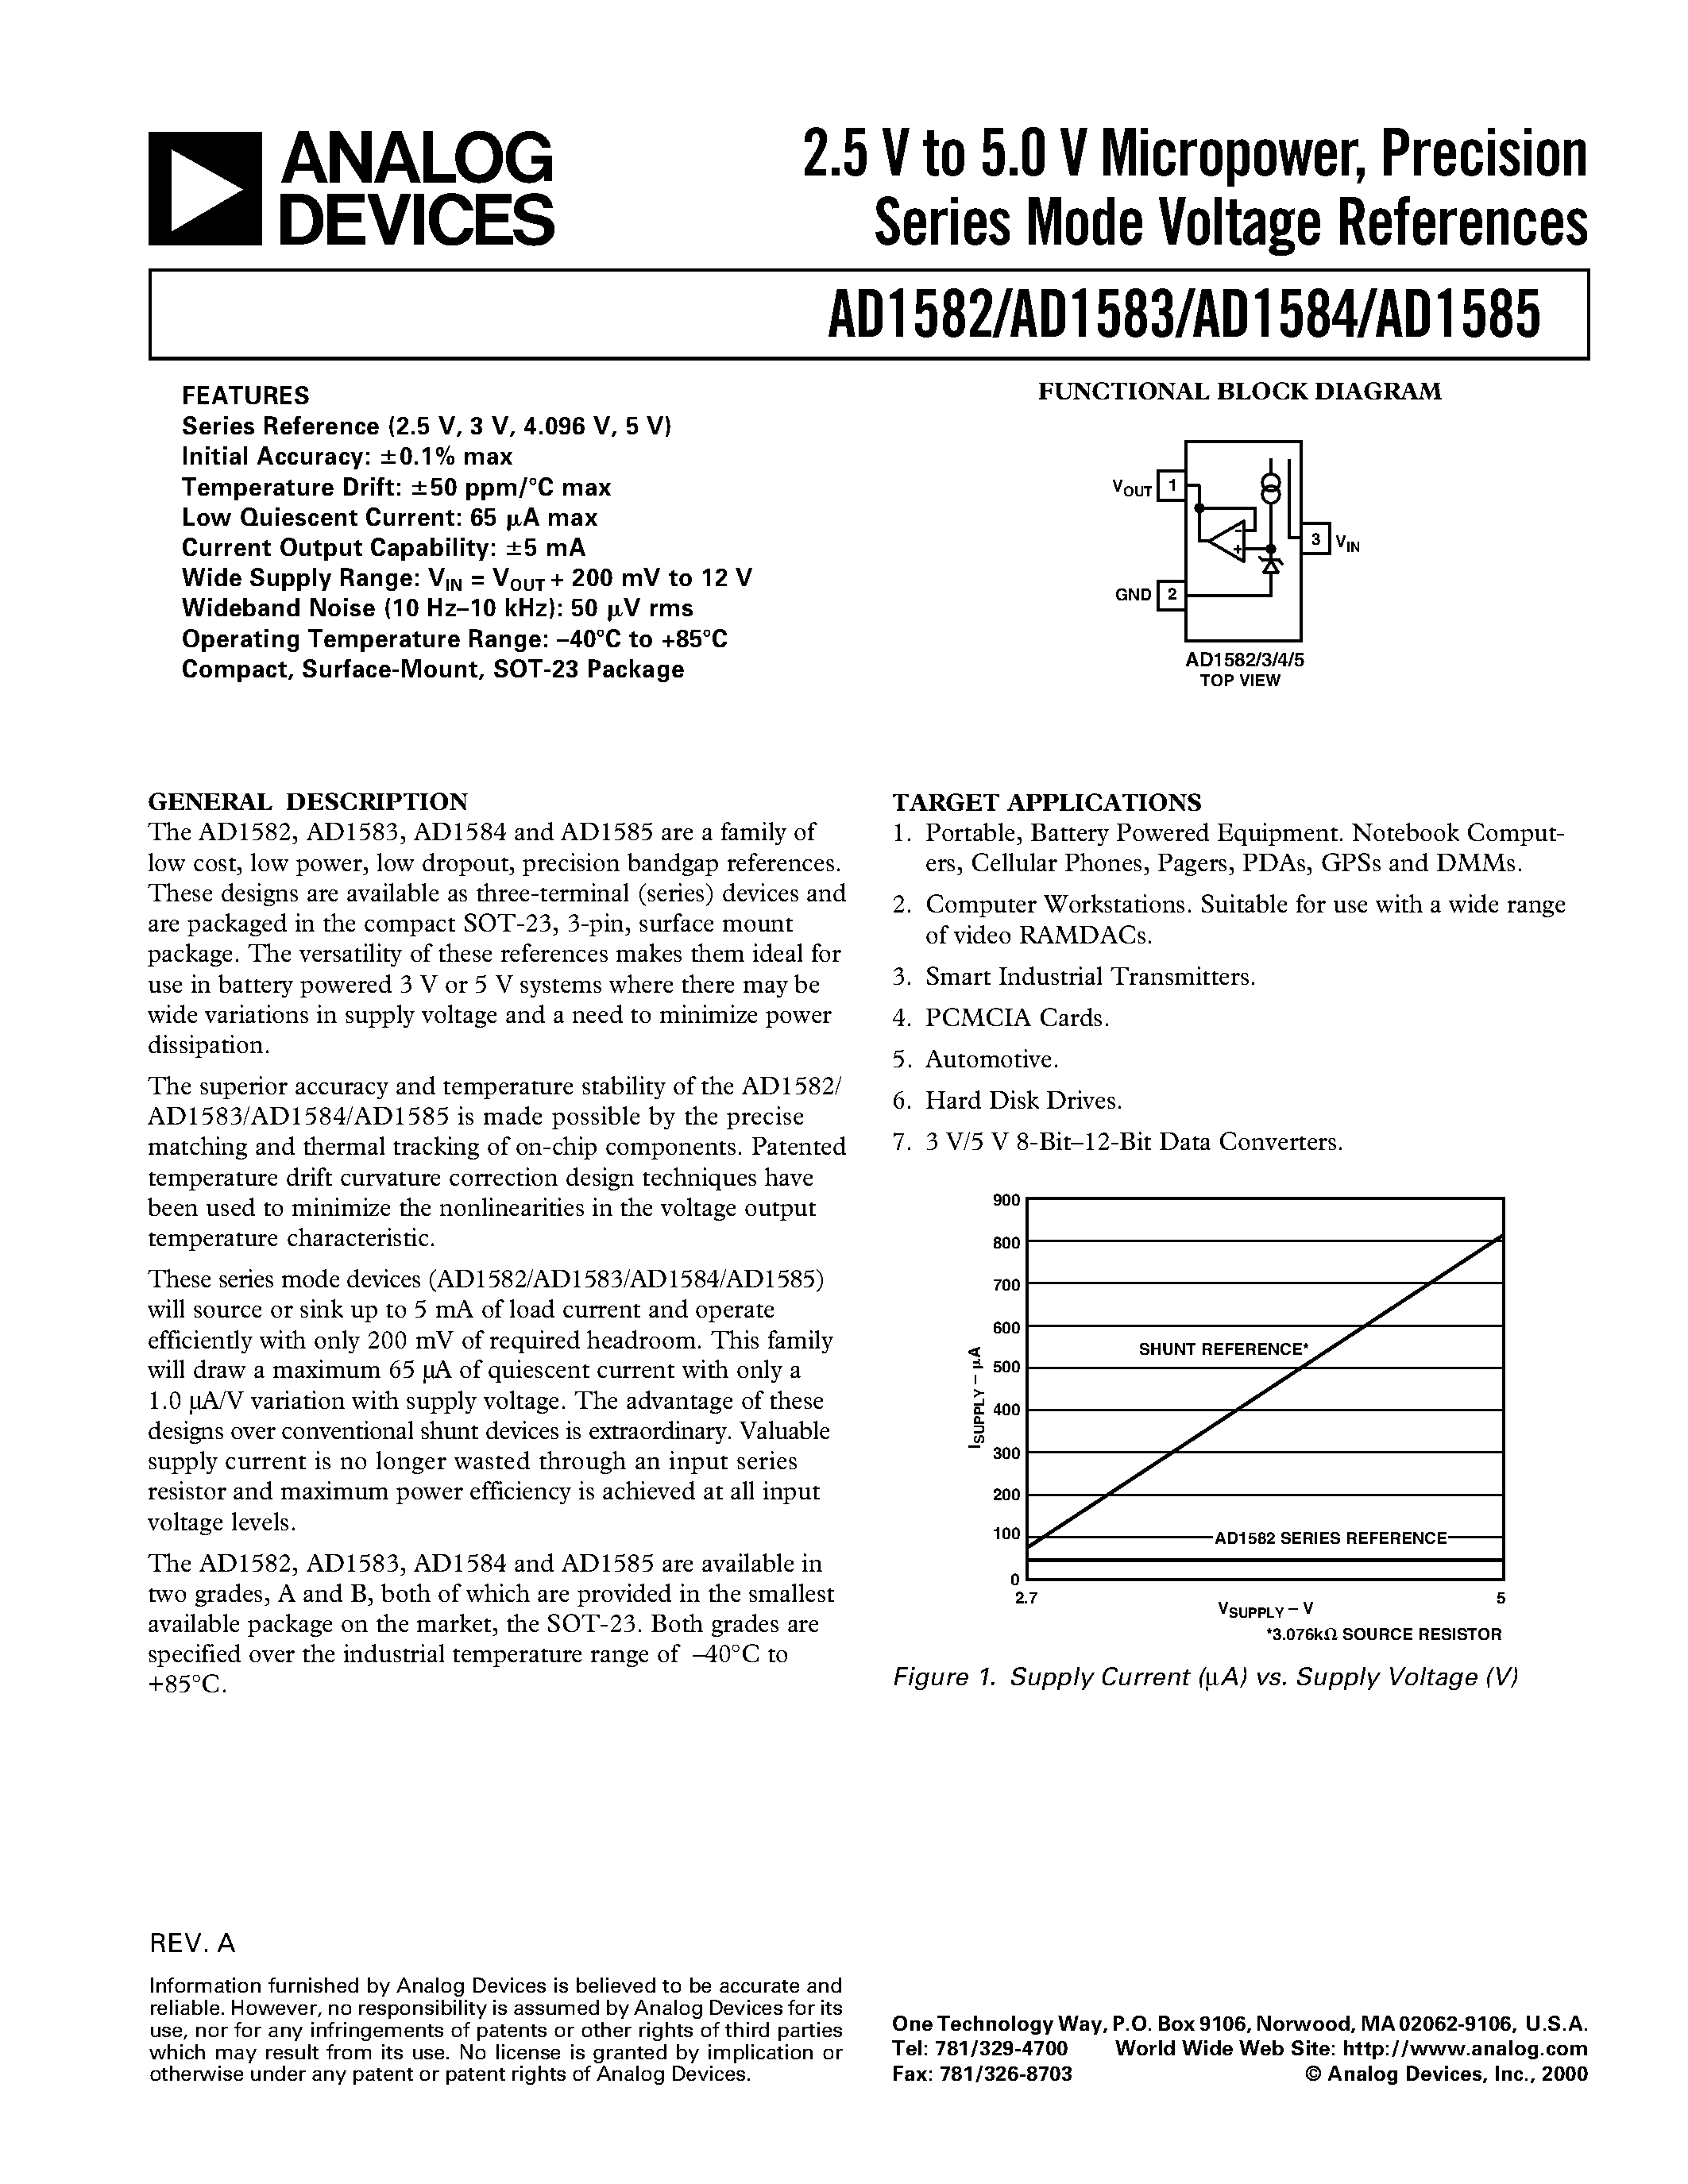 Datasheet AD1584A - 2.5 V to 5.0 V Micropower/ Precision Series Mode Voltage References page 1